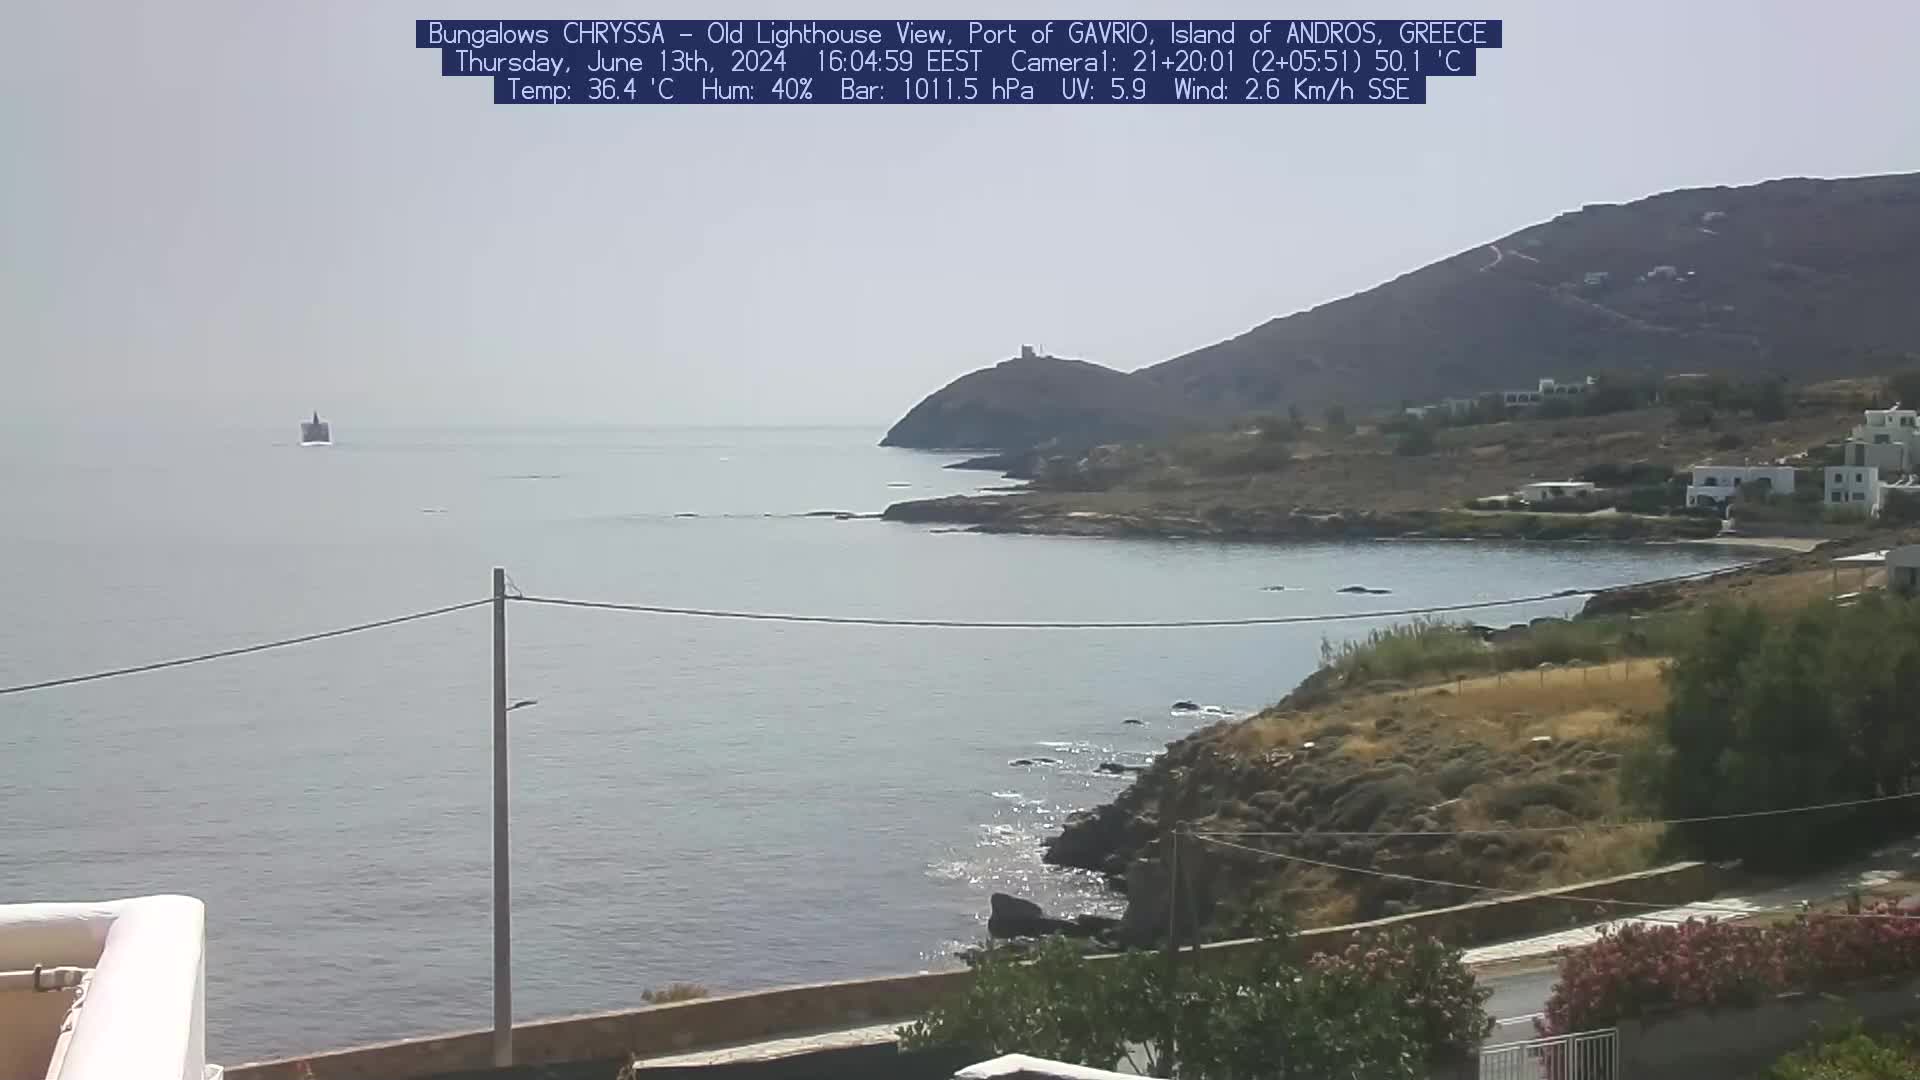 Andros - Gavrion Mar. 16:05